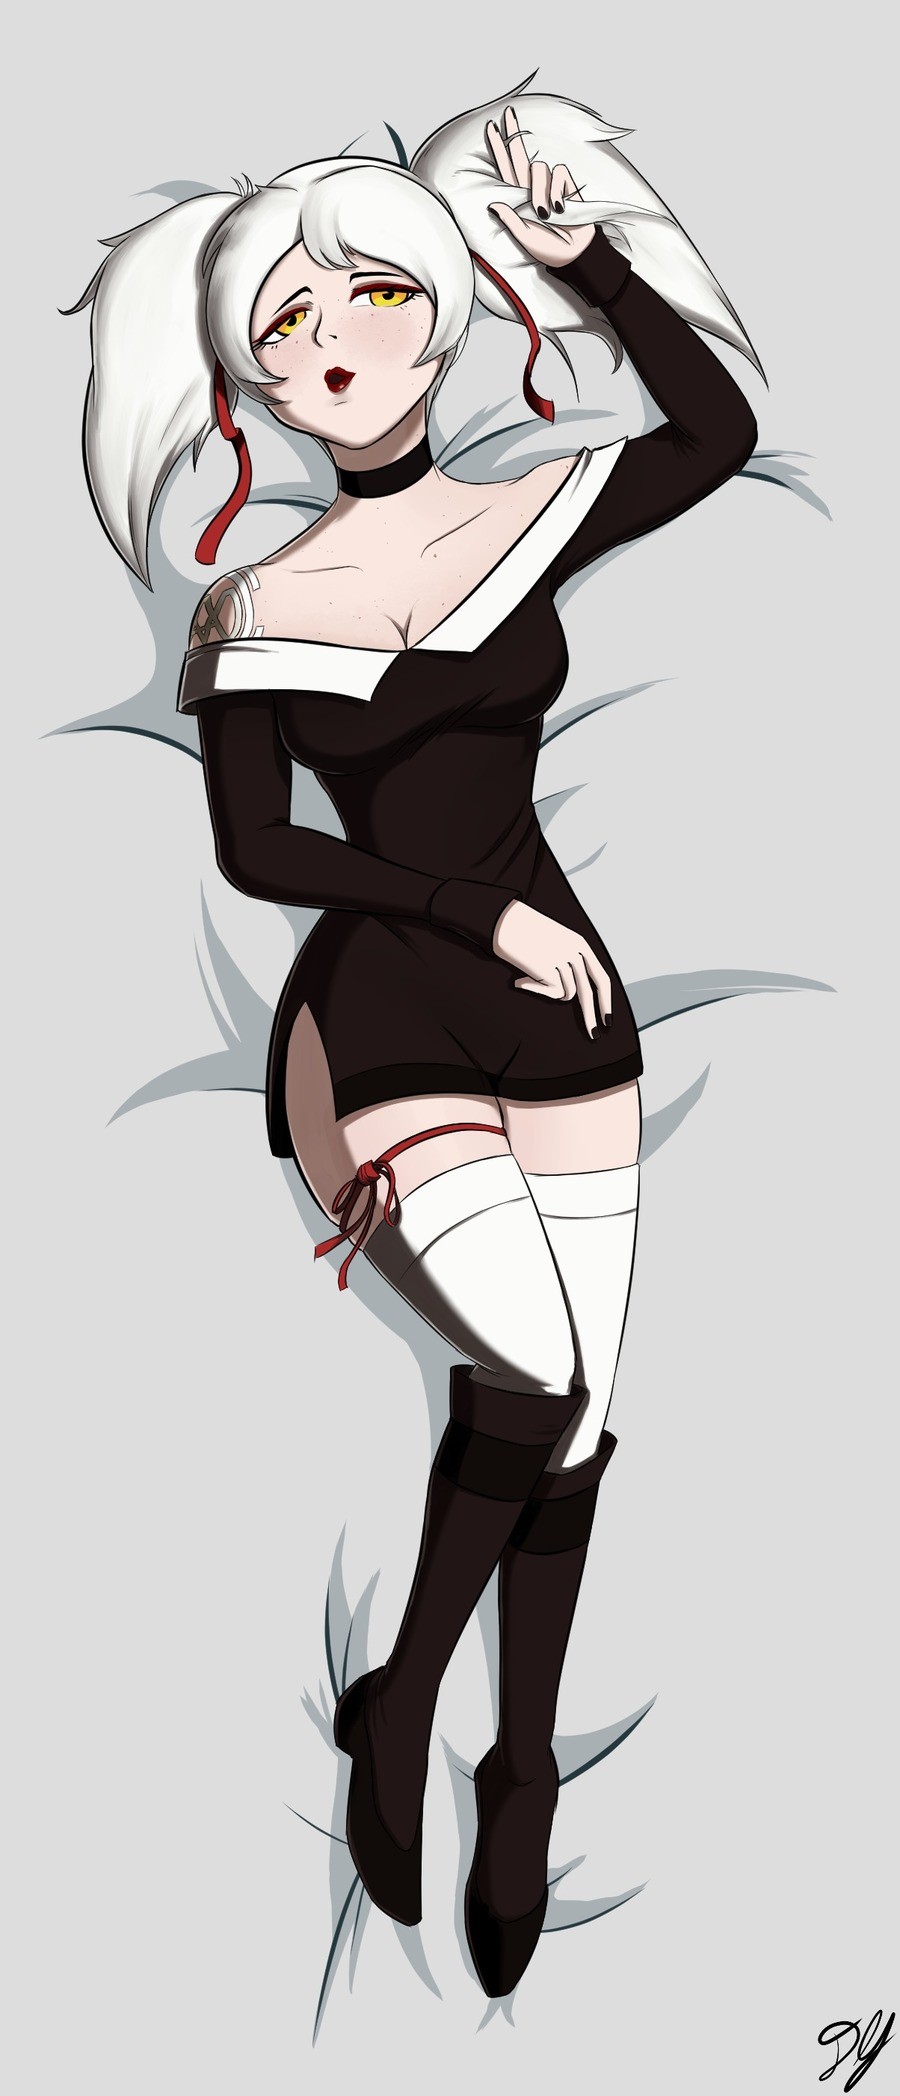 Lilith body pillow-Chromatose. im on the slippery slope to eventually making lewds, heres some more fanart of the kickstarter game Chromatose join list: DaringD